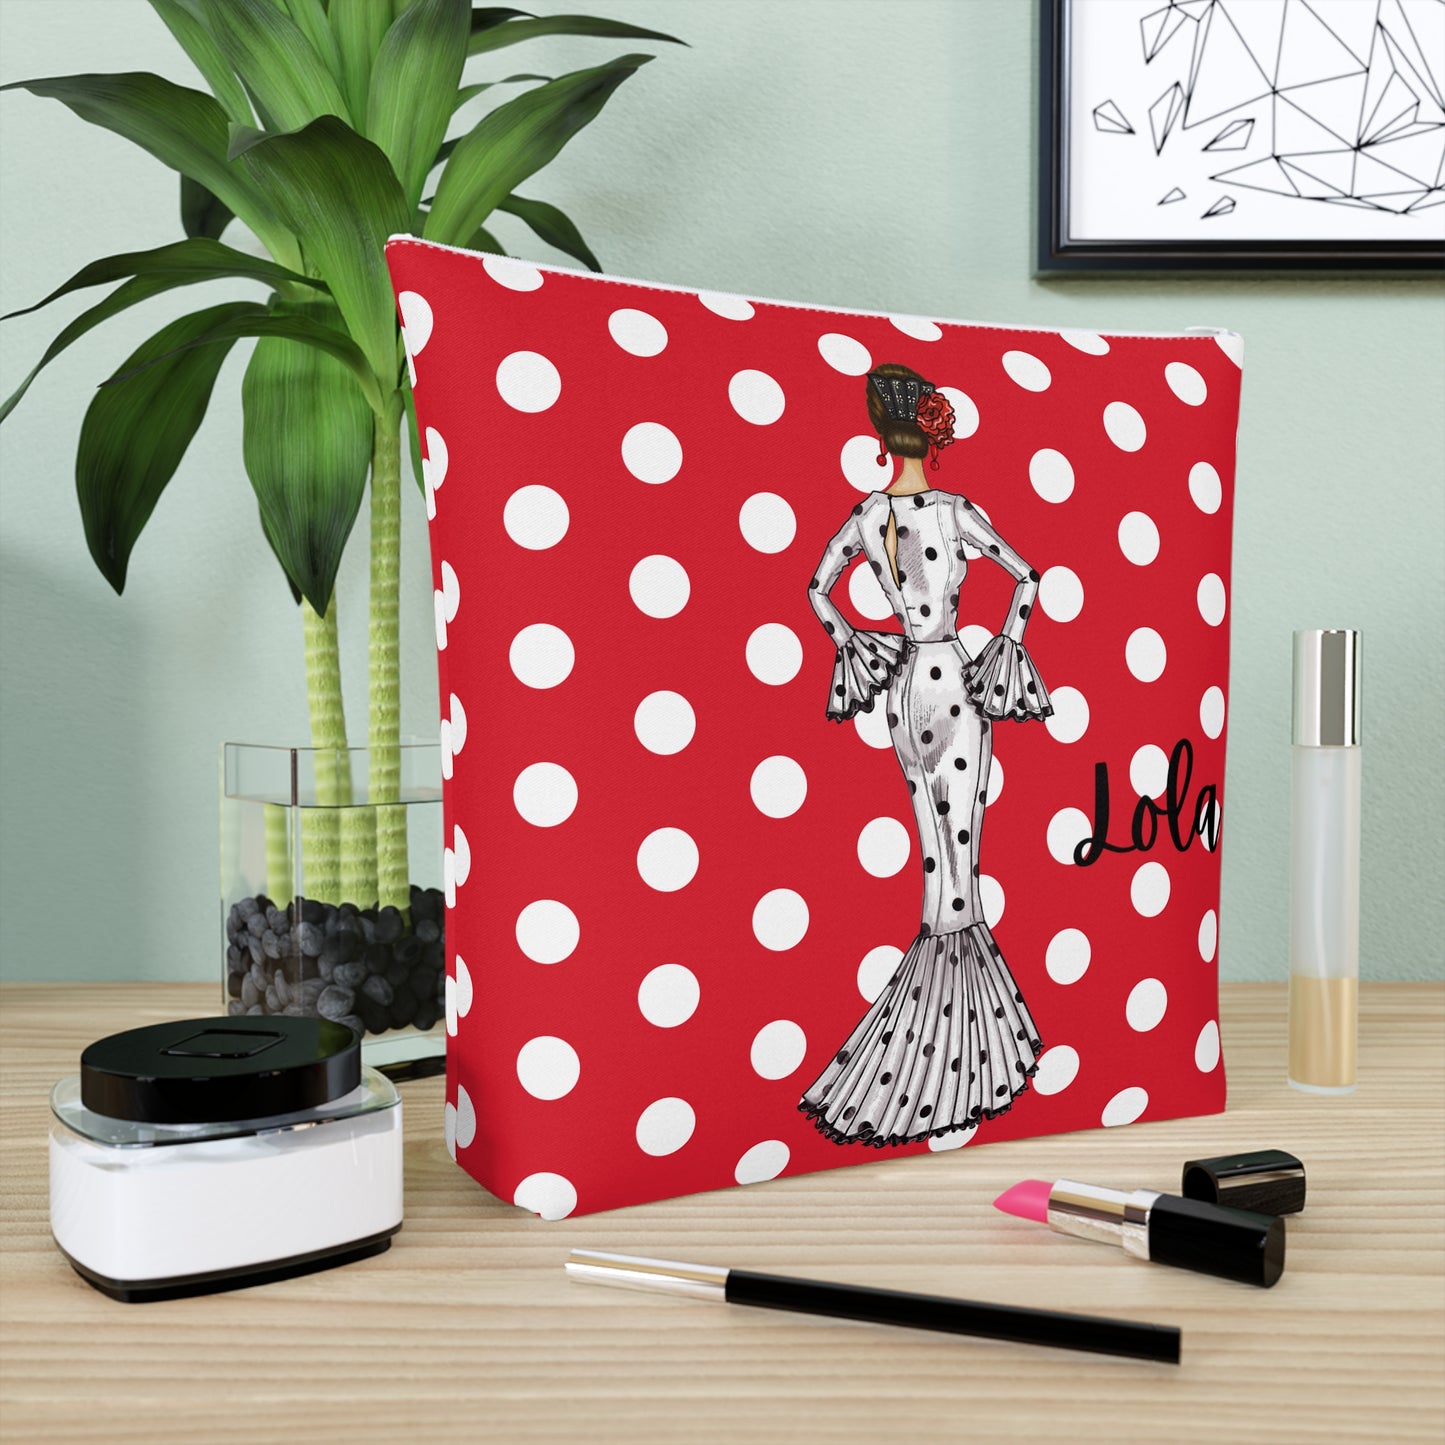 Customizable all purpose cotton bag, red background with white polka dots and our flamenco dancer María in a white dress.